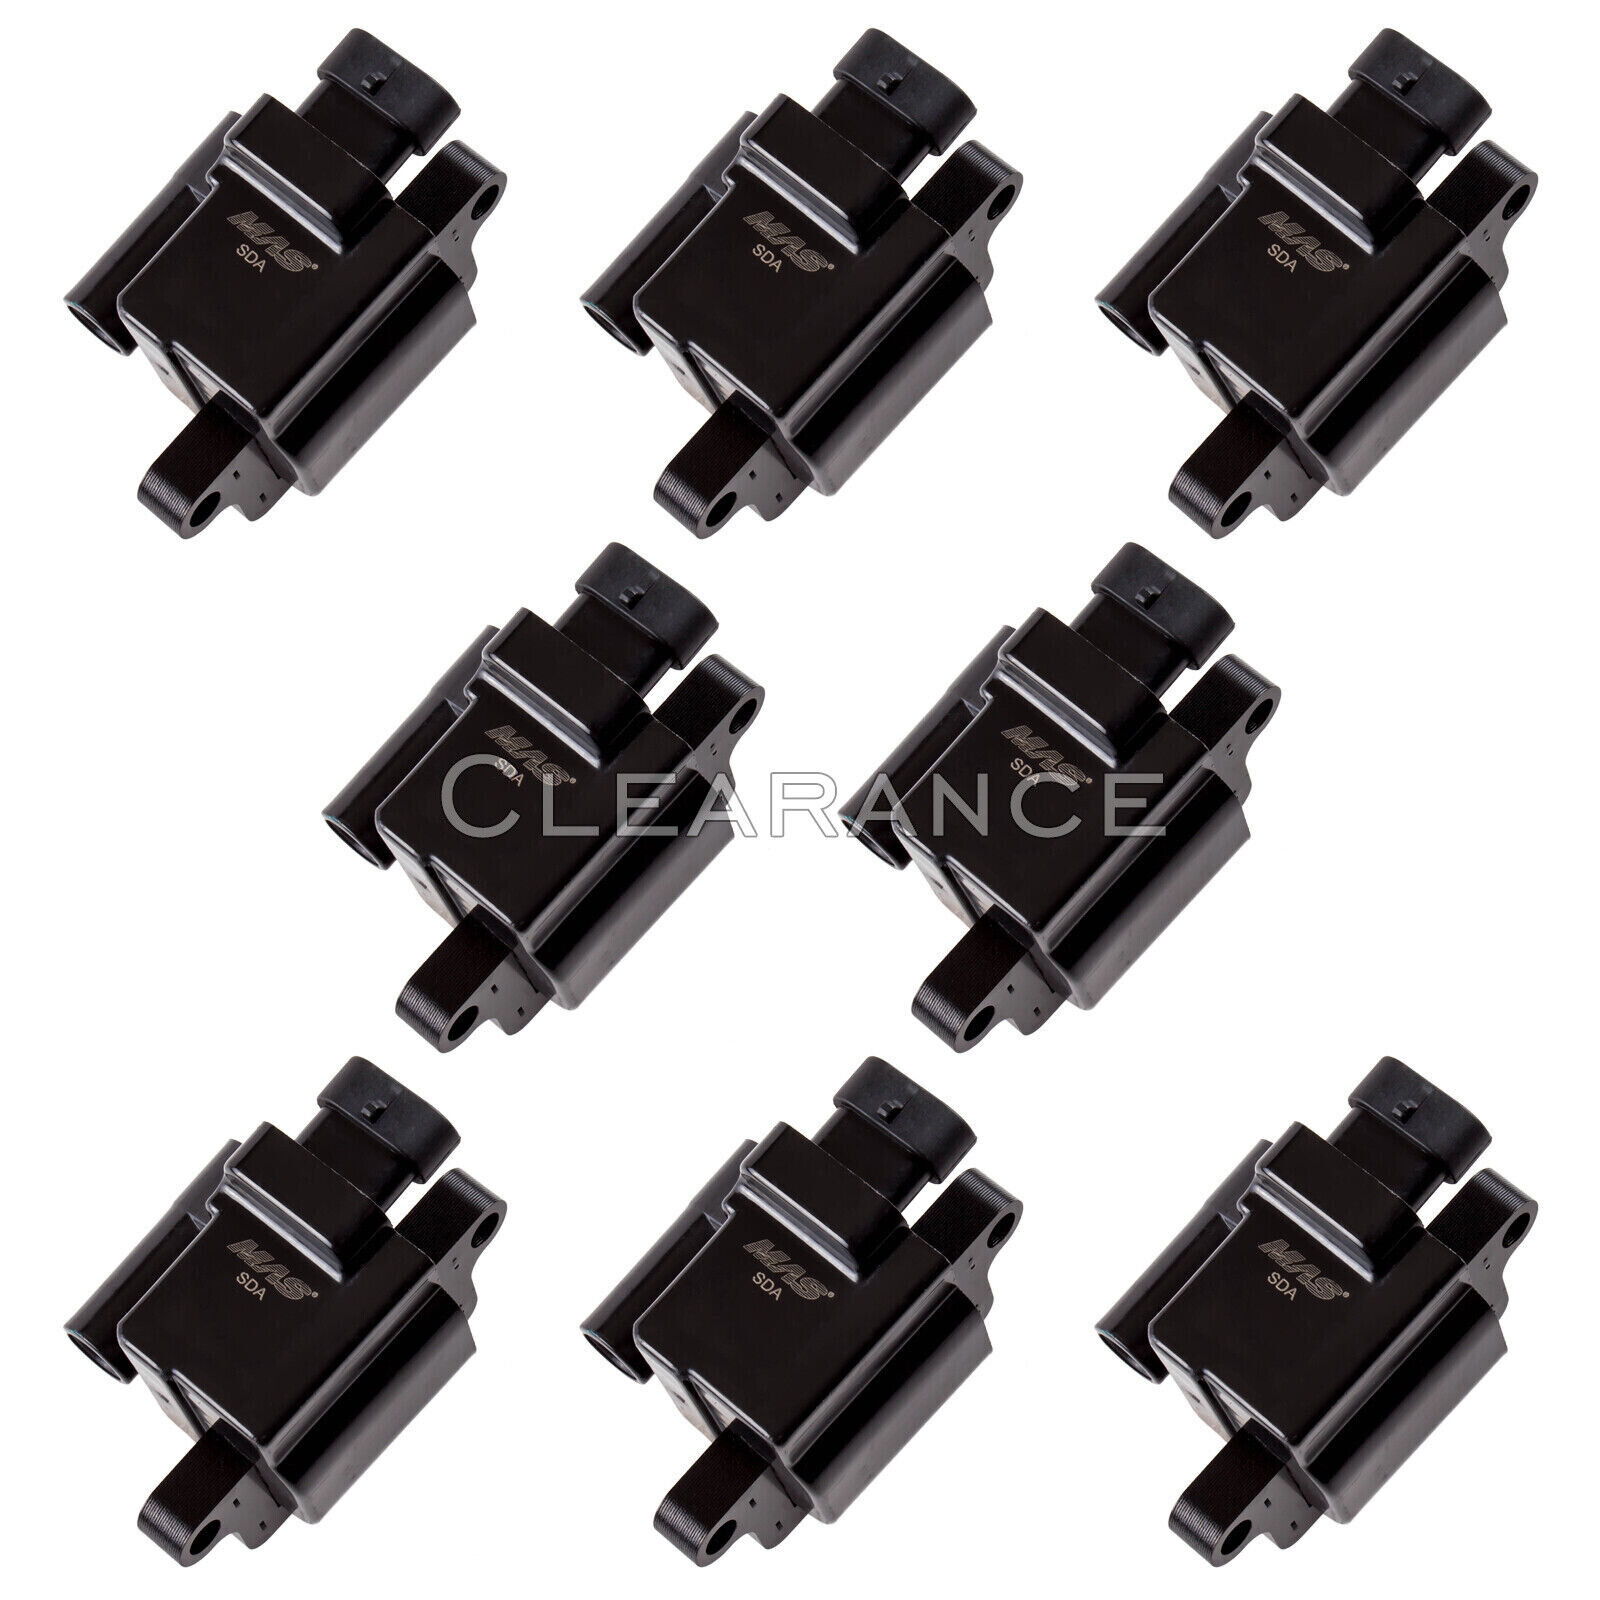 8 High Performance Square Ignition Coils For Chevy GMC 4.8L 5.3L 6.0L 8.1L UF271